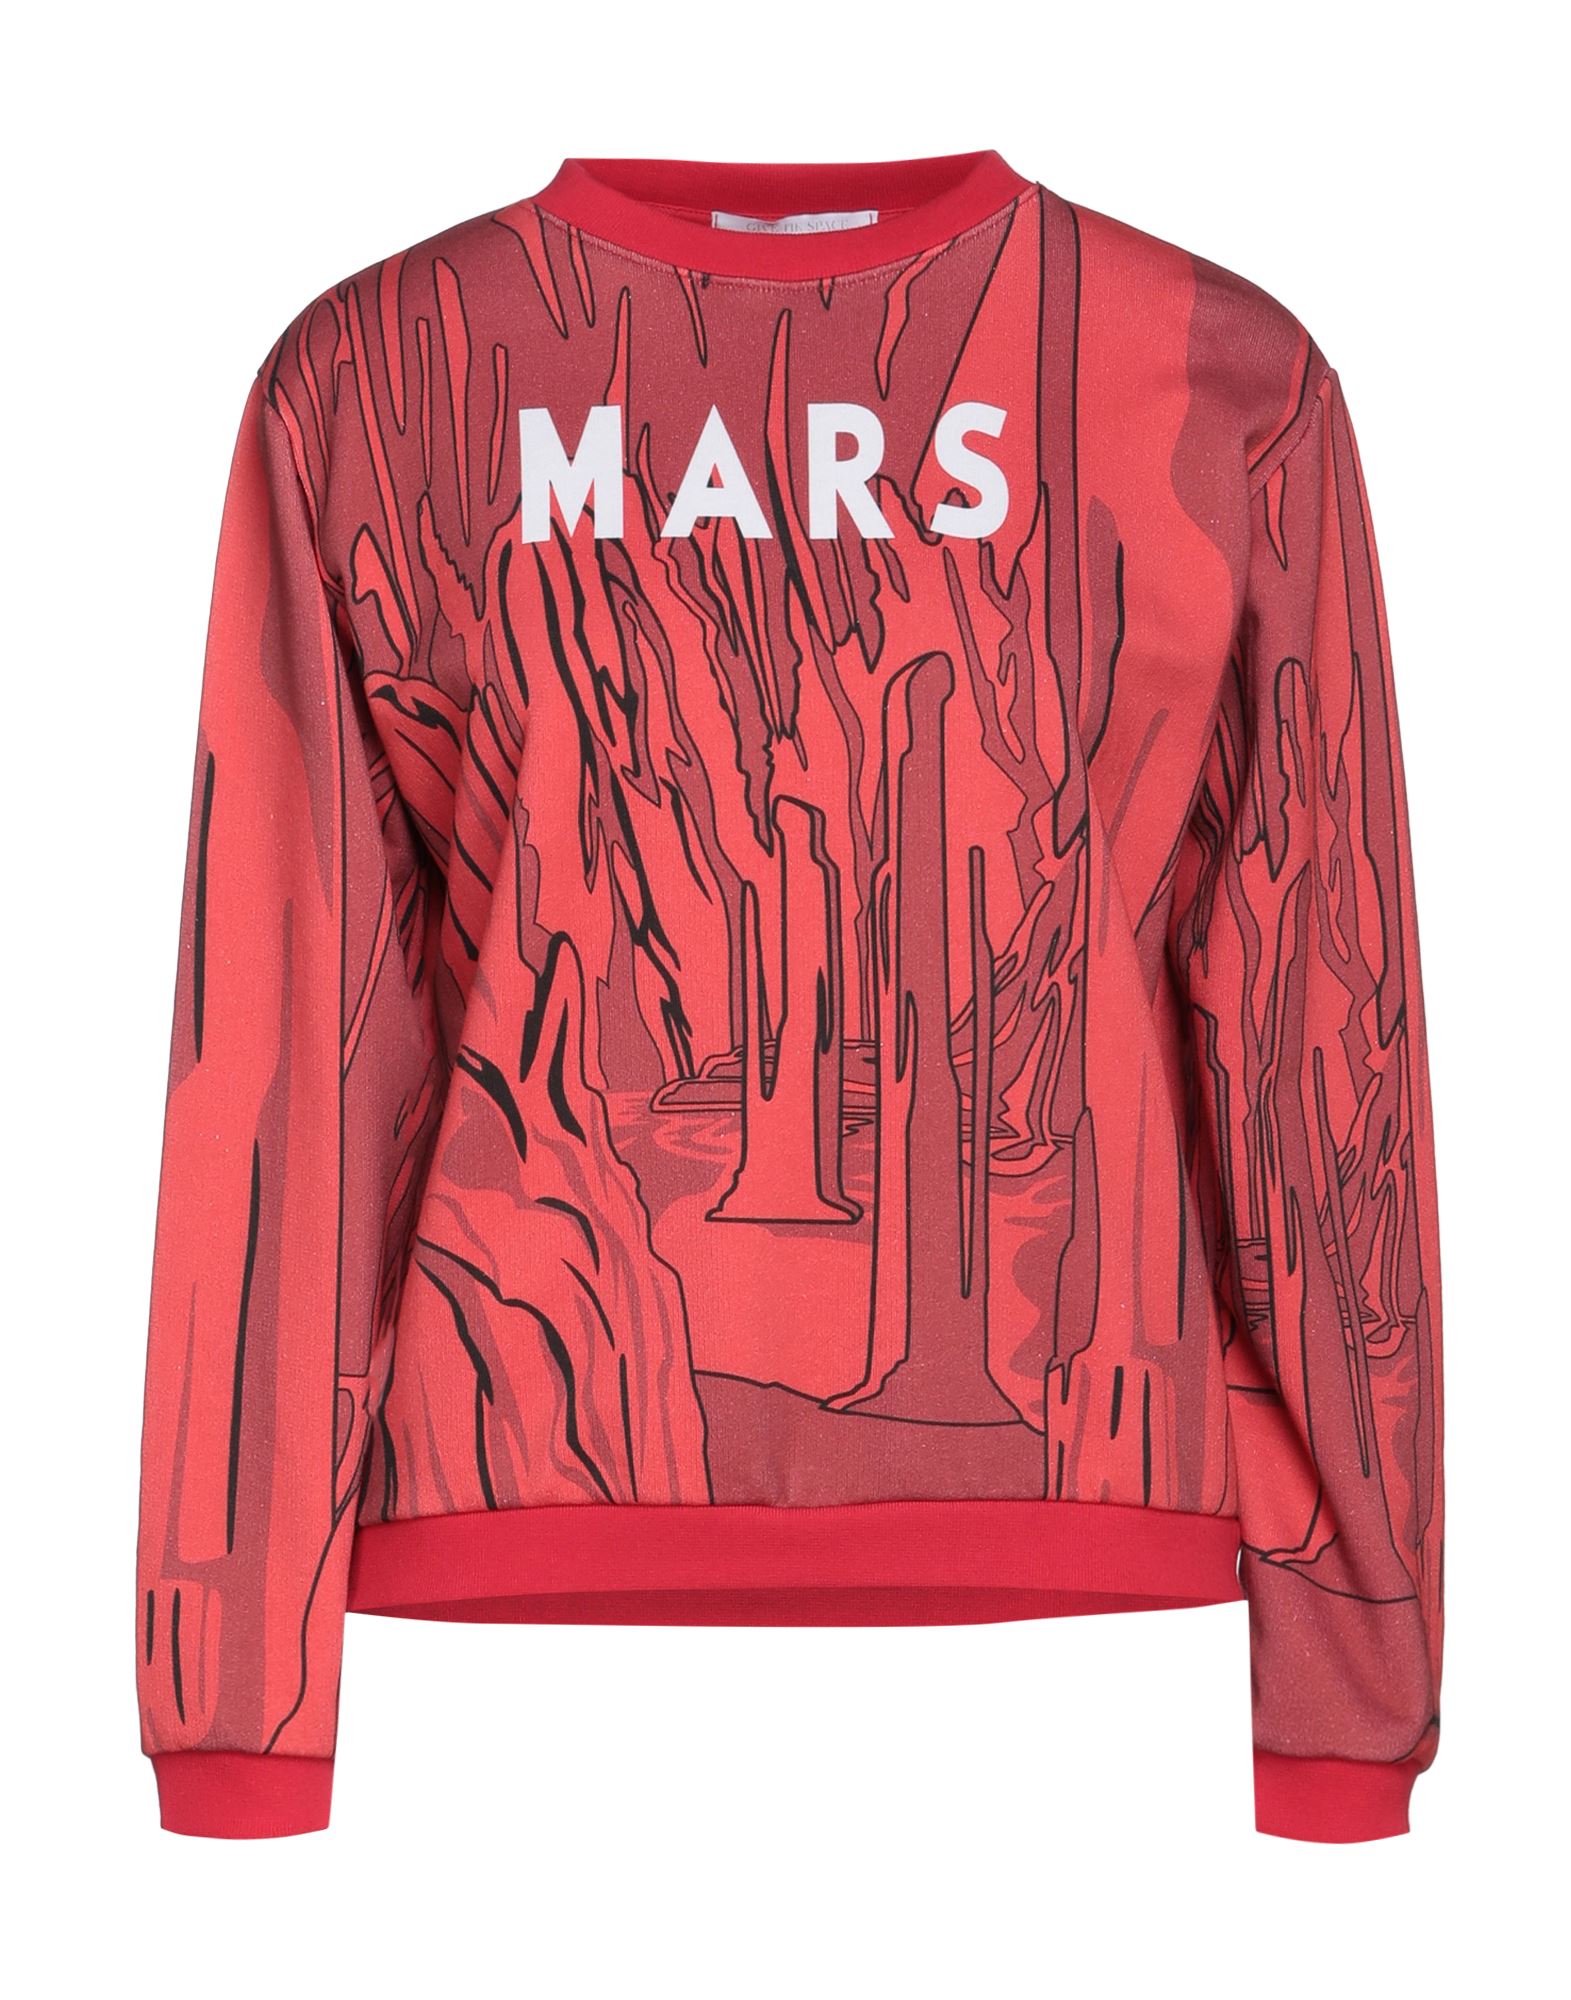 Give Me Space Sweatshirts In Red